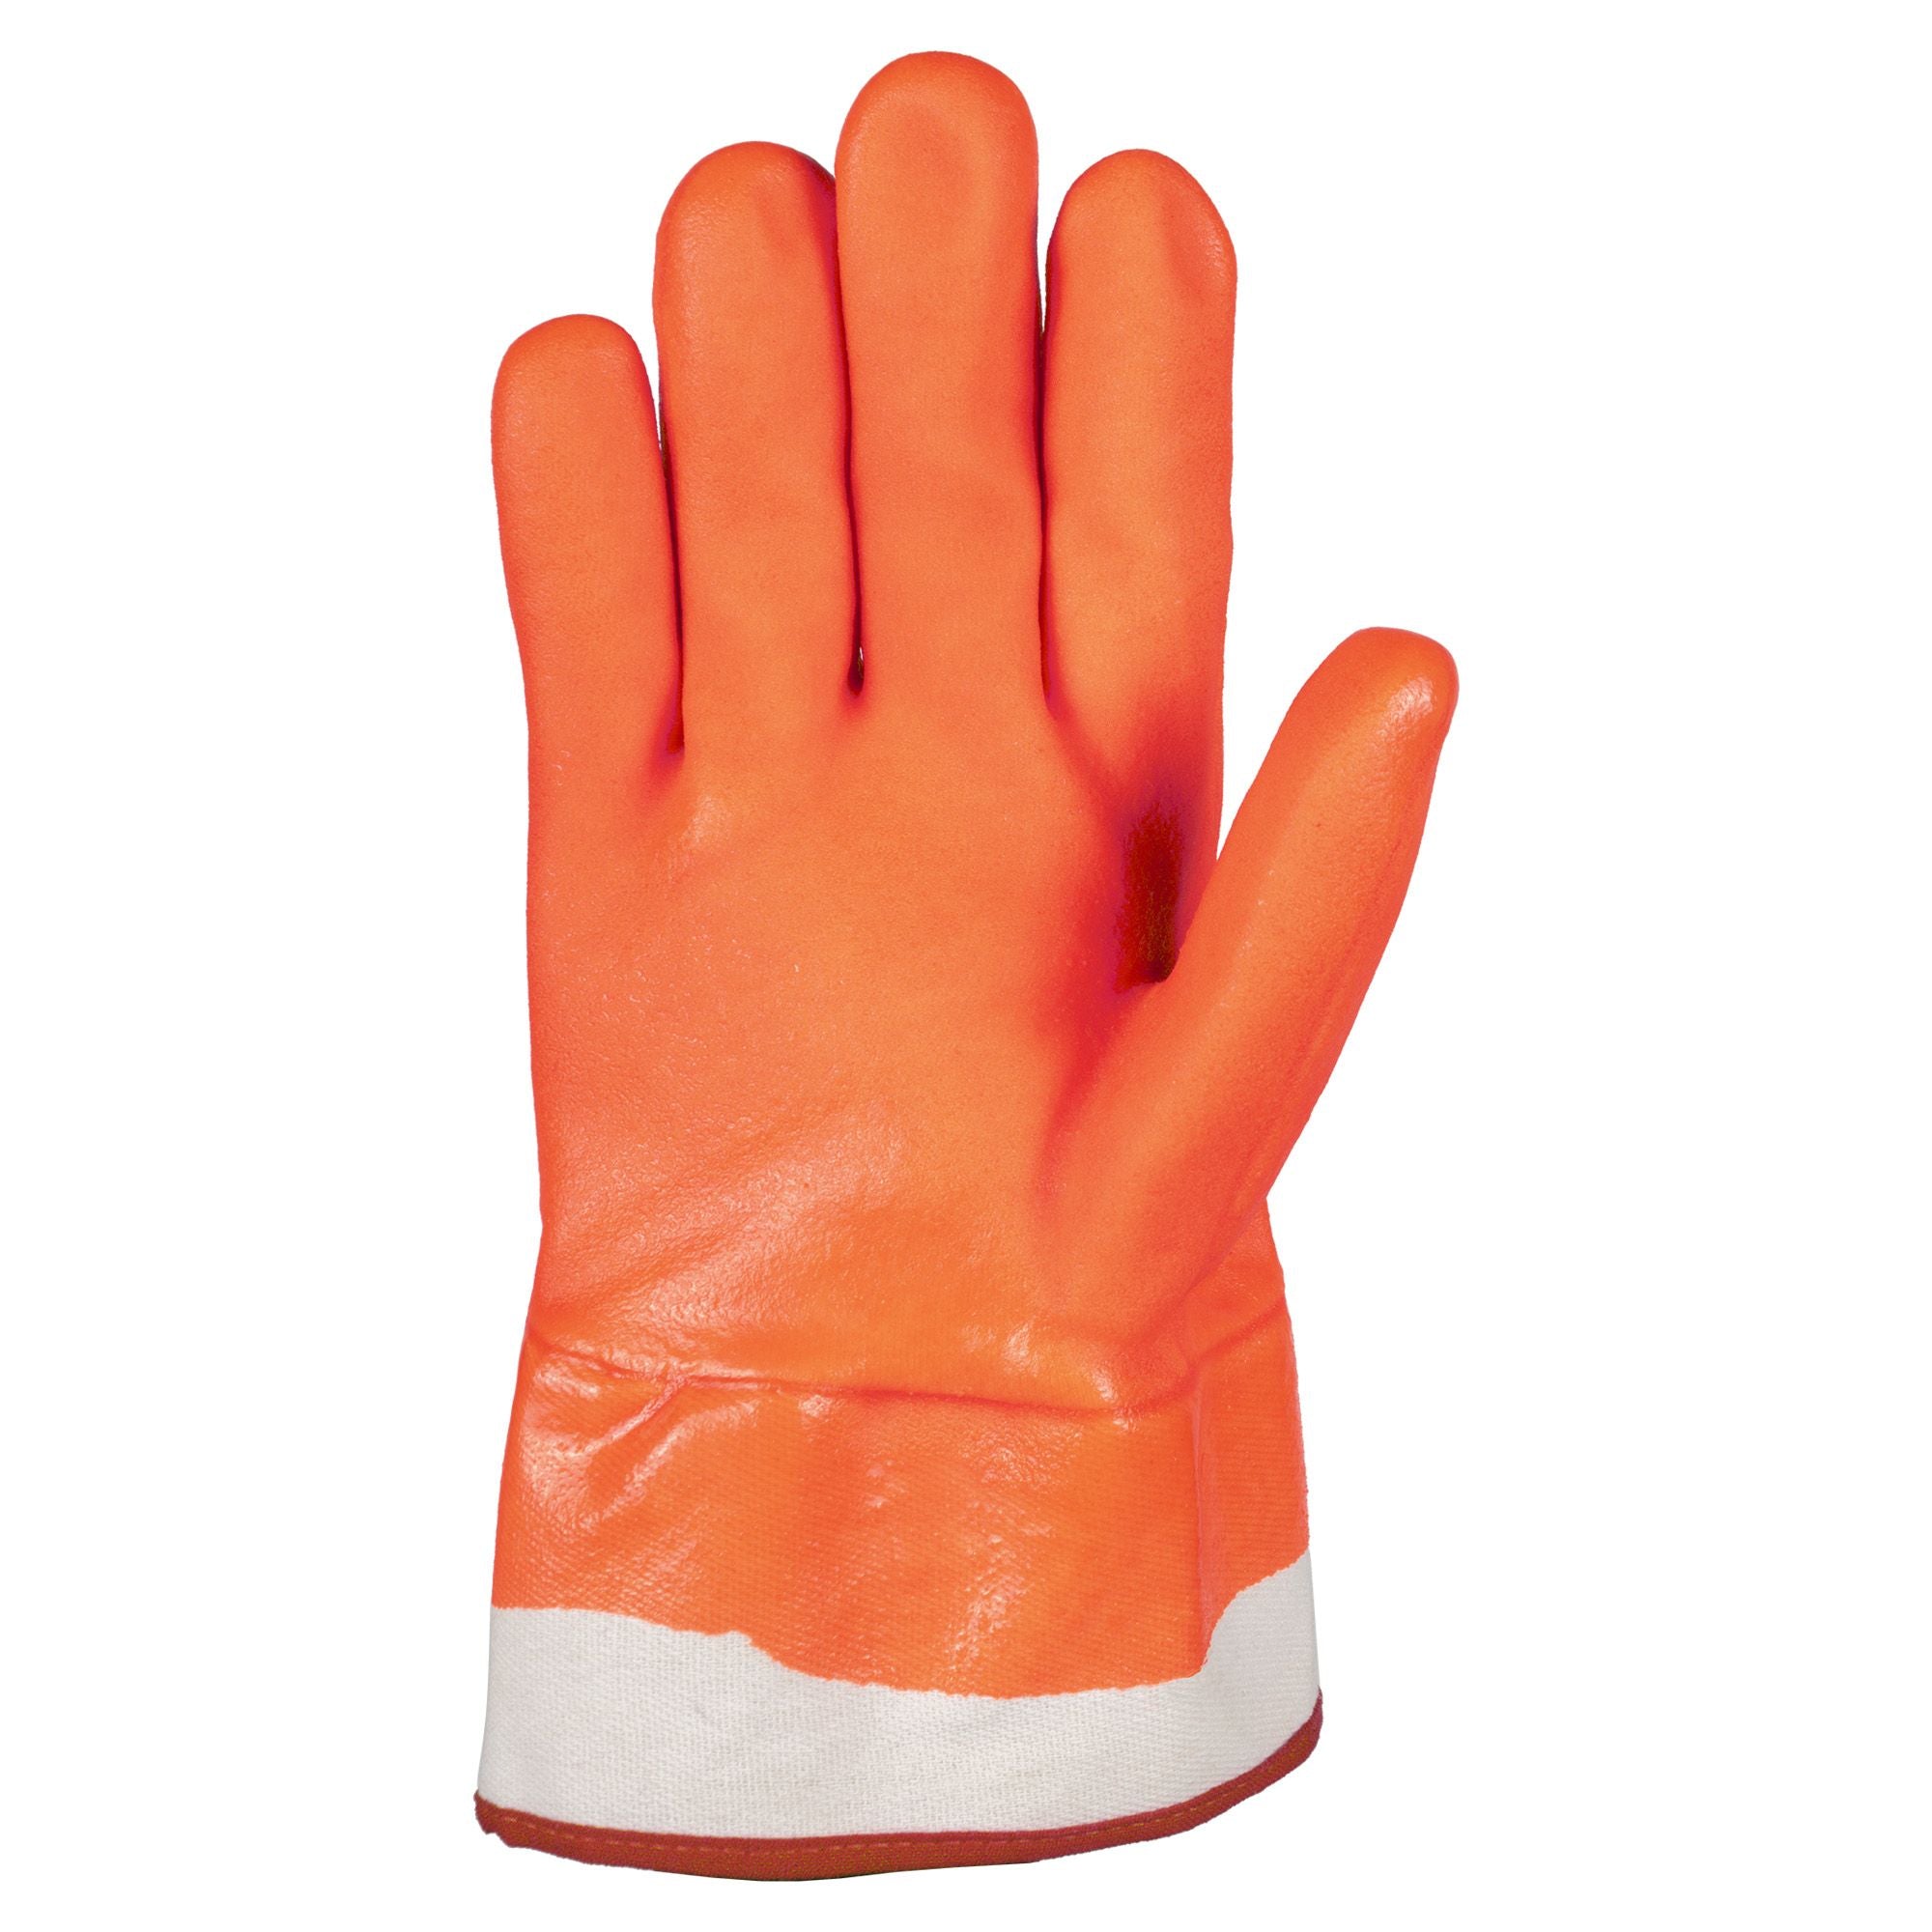 Horizon Winter Lined Orange PVC Double Coated Safety Cuff Work Gloves